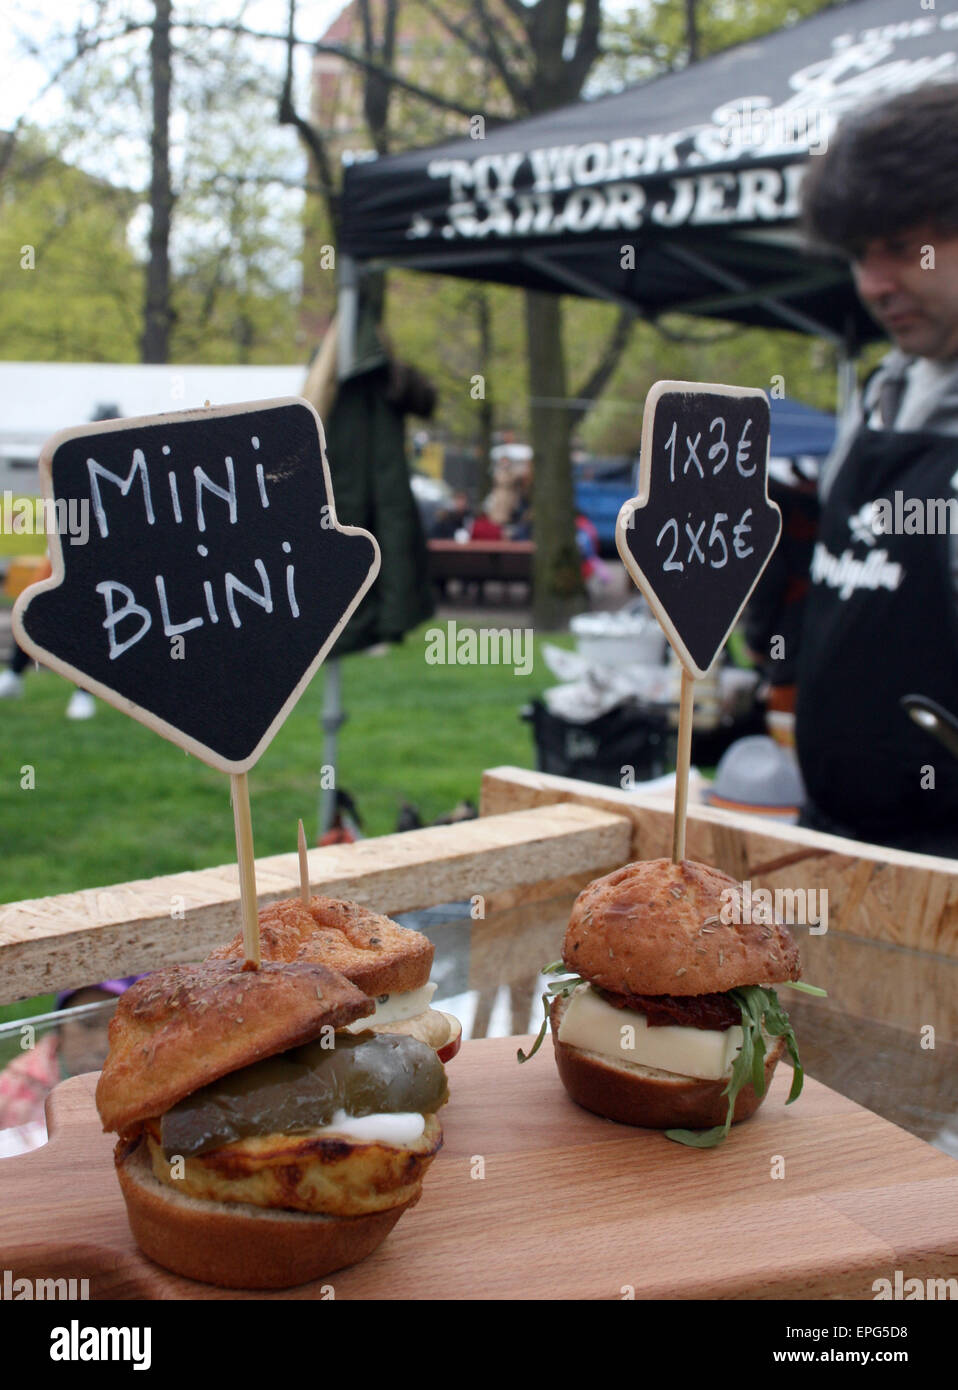 Helsinki, Finland. 16th May, 2015. Antonio Fernandez from Spain offers mini blinis at his food stall during Restaurant Day in Helsinki, Finland, 16 May 2015. Photo: Julia Waeschenbach/dpa/Alamy Live News Stock Photo